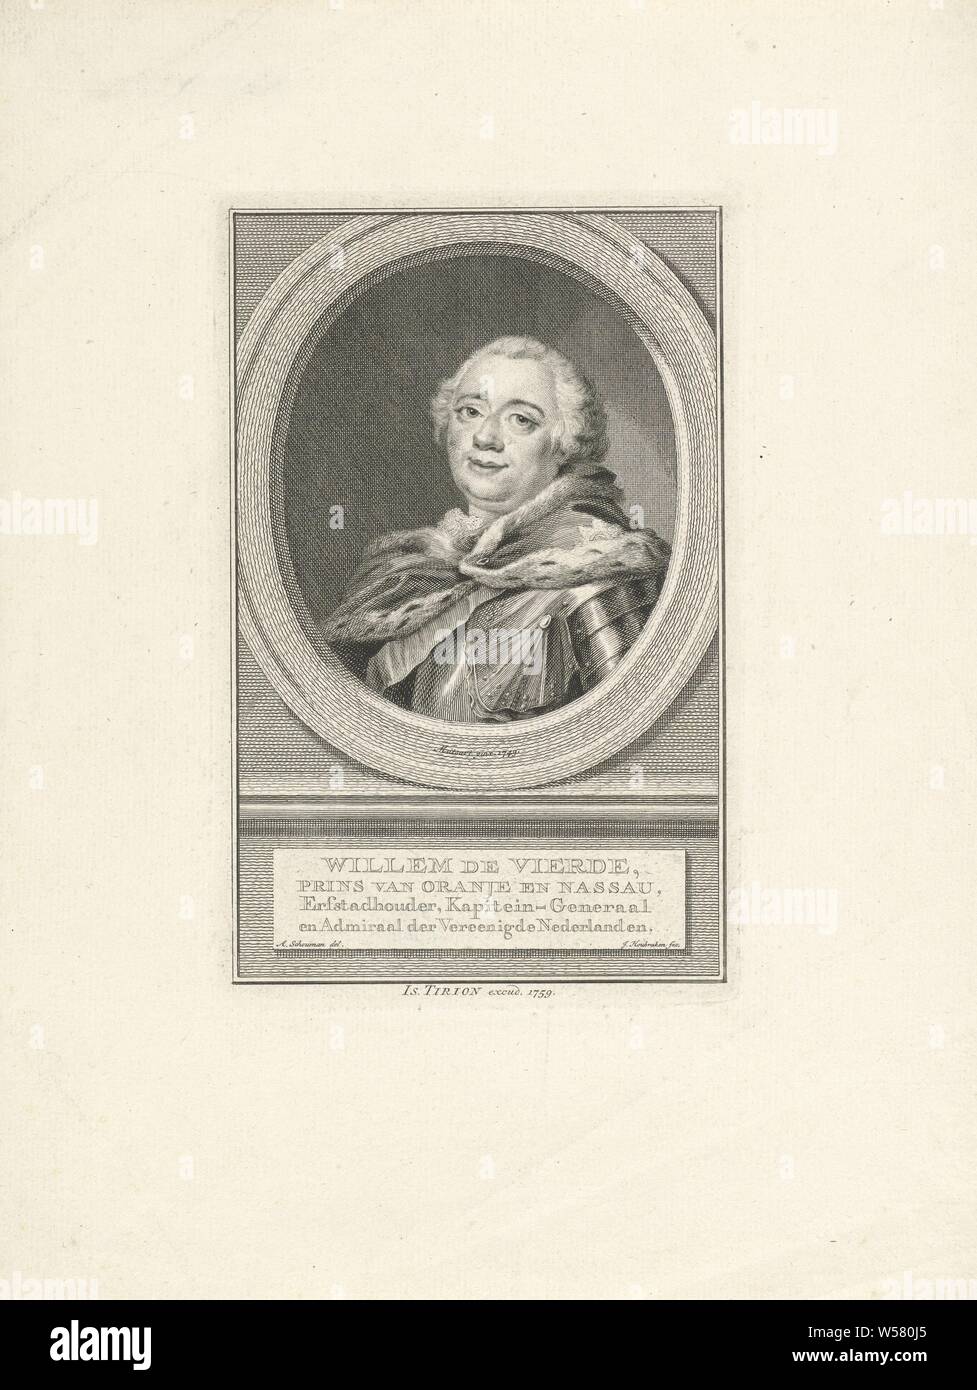 Portrait of William IV, Prince of Orange-Nassau, William IV (Prince van Oranje-Nassau), Jacob Houbraken (mentioned on object), Amsterdam, 1759, paper, engraving, h 181 mm × w 117 mm Stock Photo